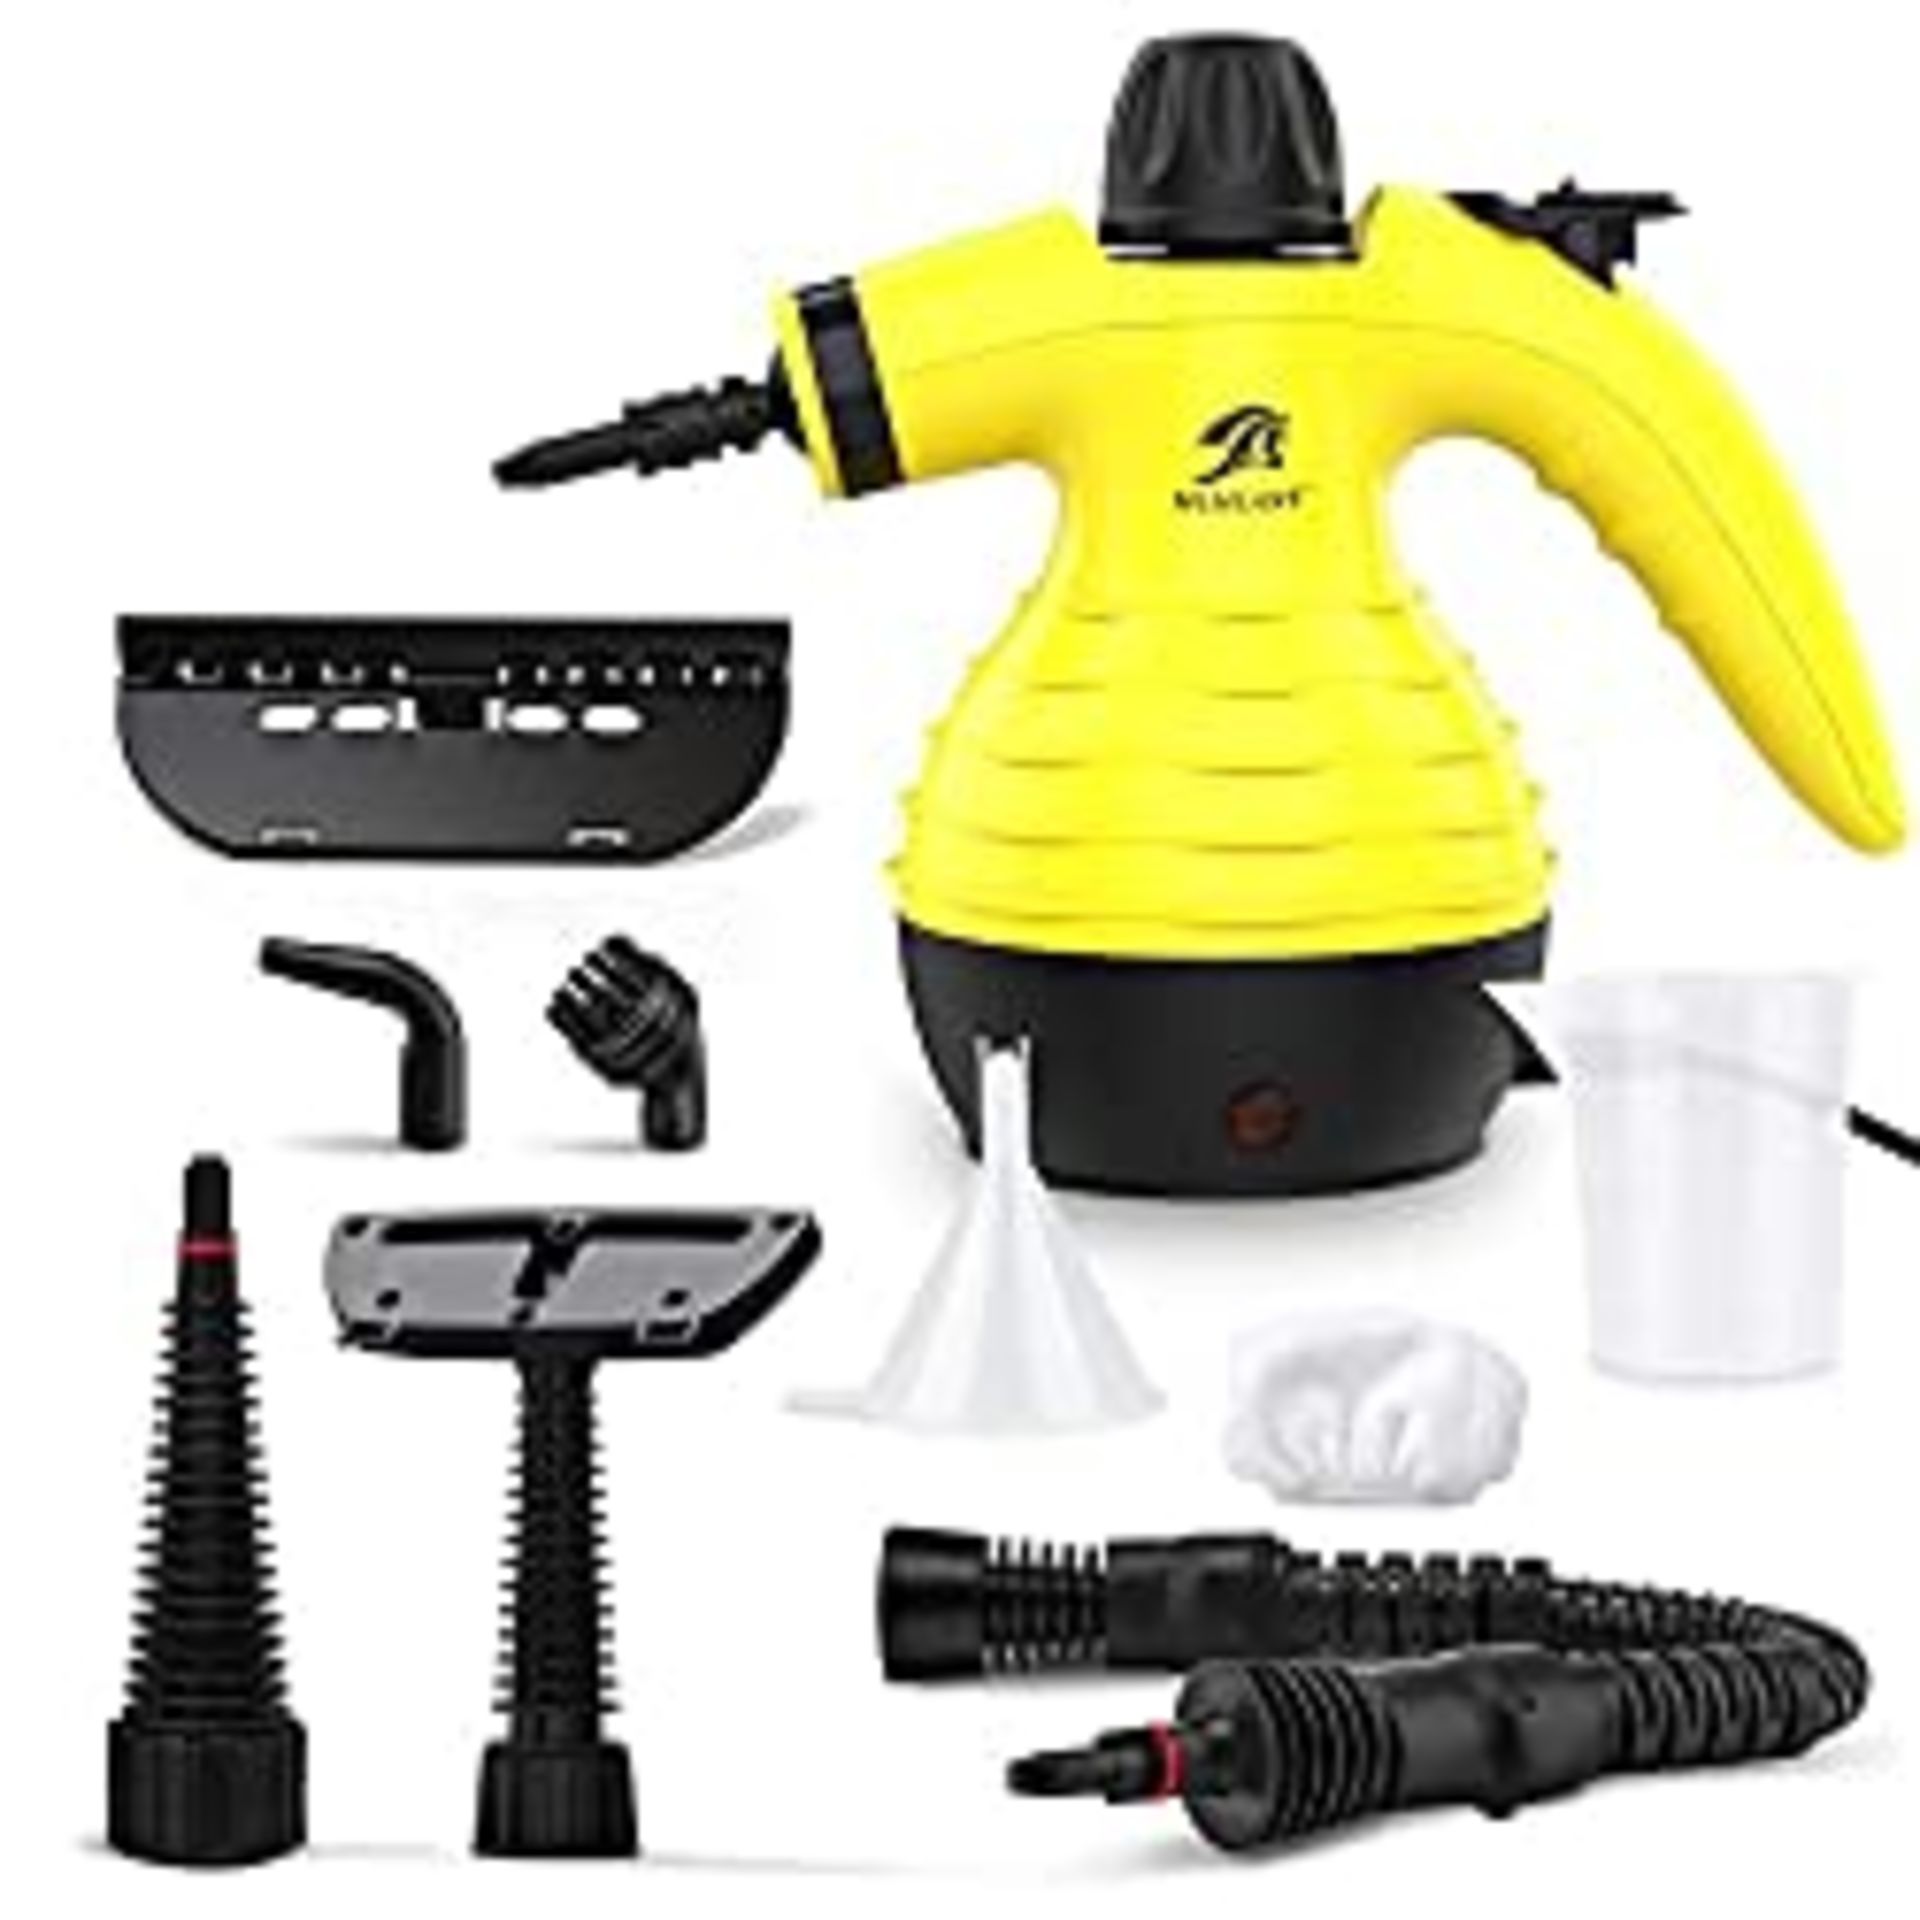 RRP £39.98 MLMLANT Hand Held Steam Cleaners For Cleaning The Home